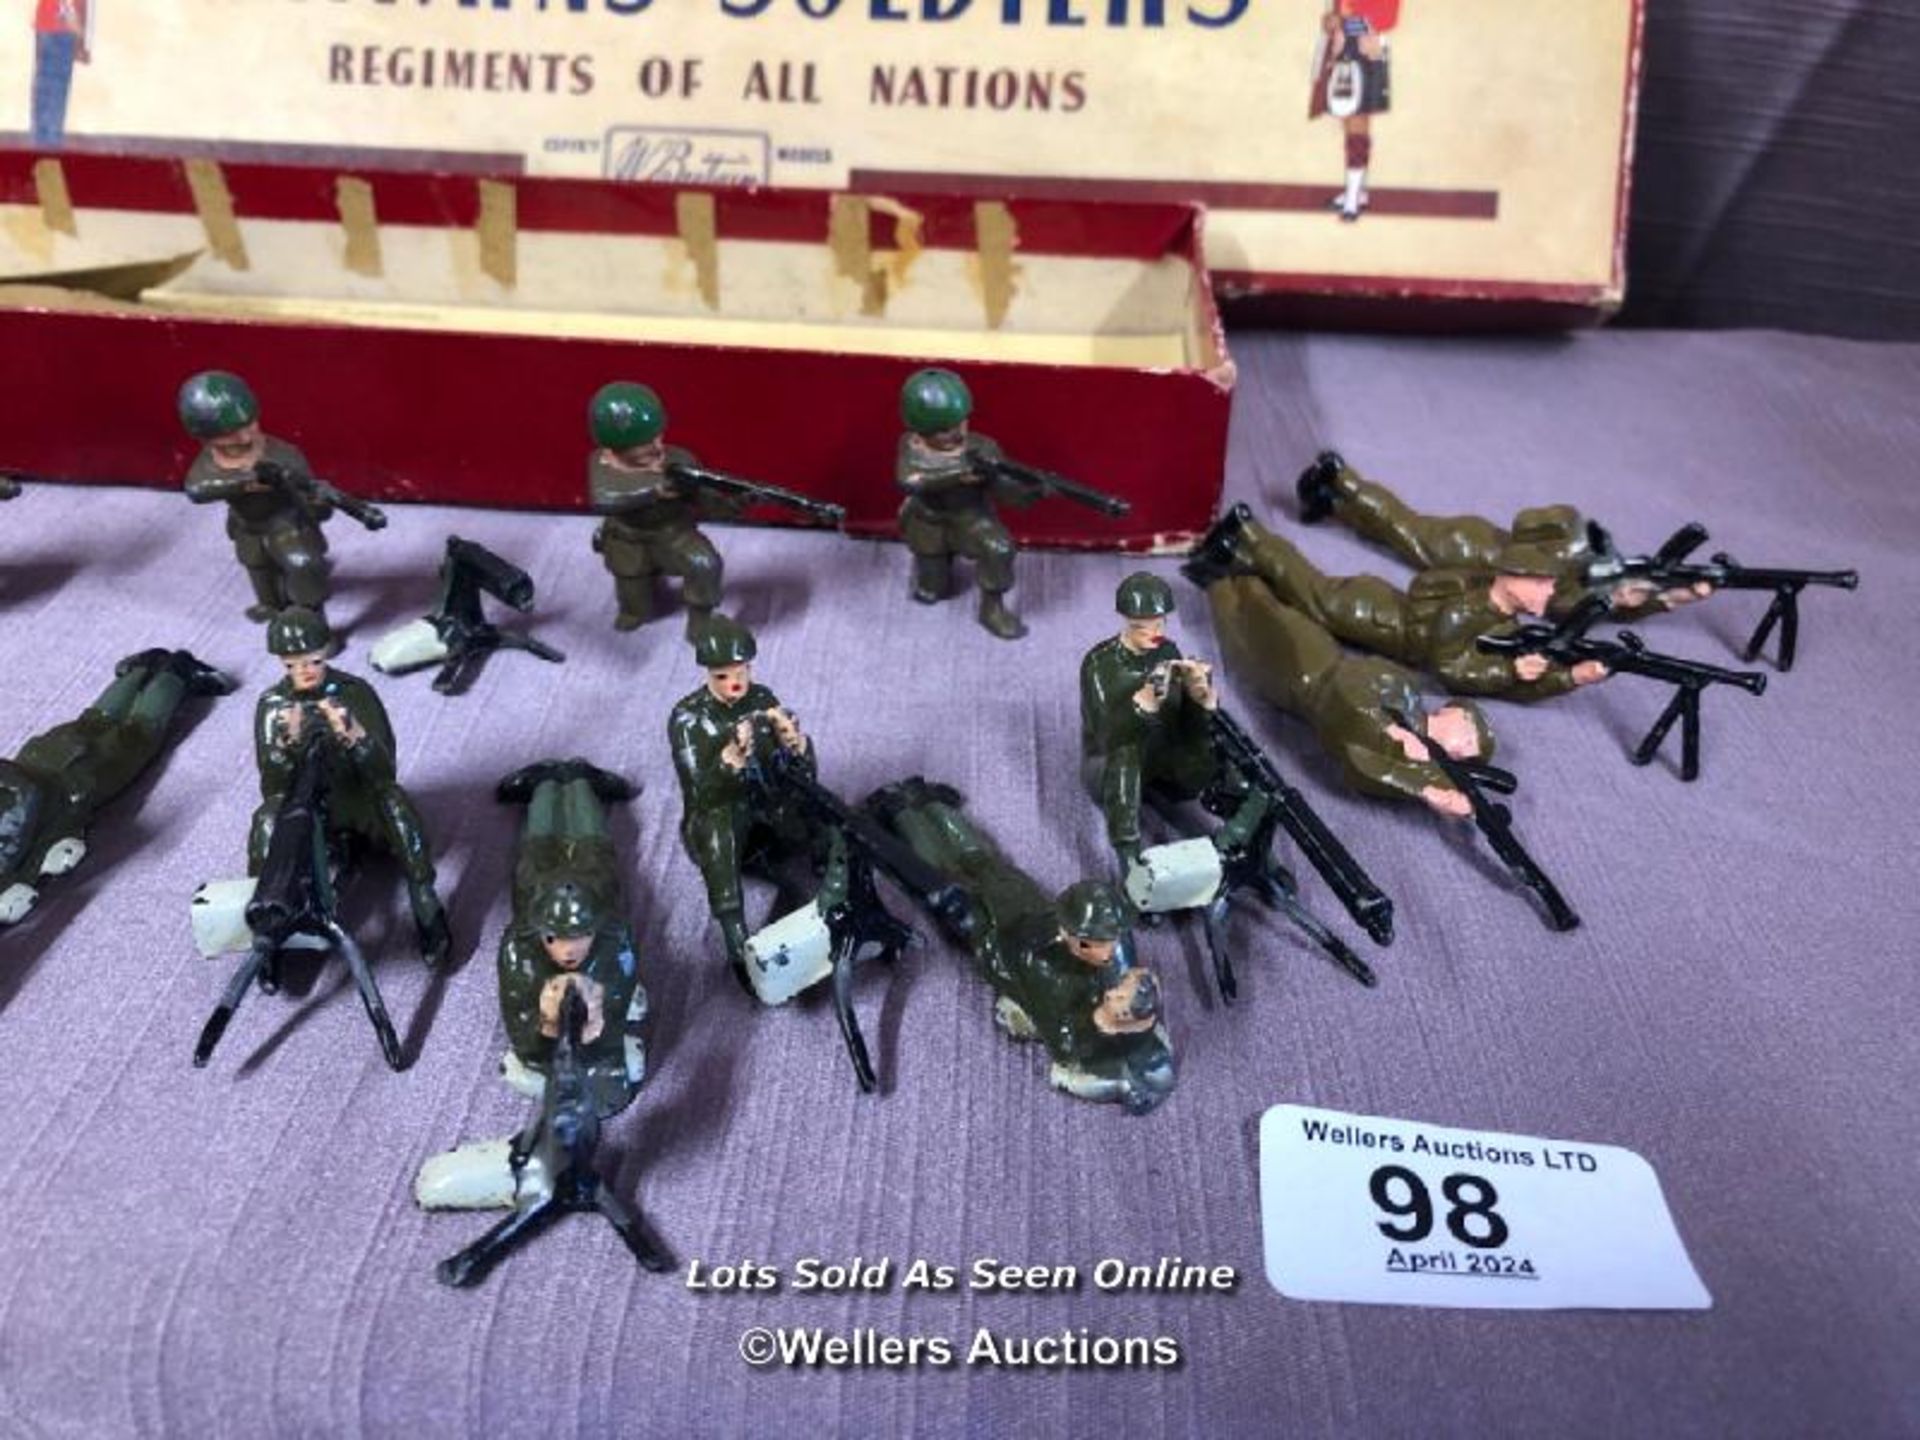 BRITAINS SOLDIERS REGIMENTS OF ALL NATIONS, WITH A NON MATCHING BOX NO. 2063 THE ARGYLL AND - Bild 3 aus 6